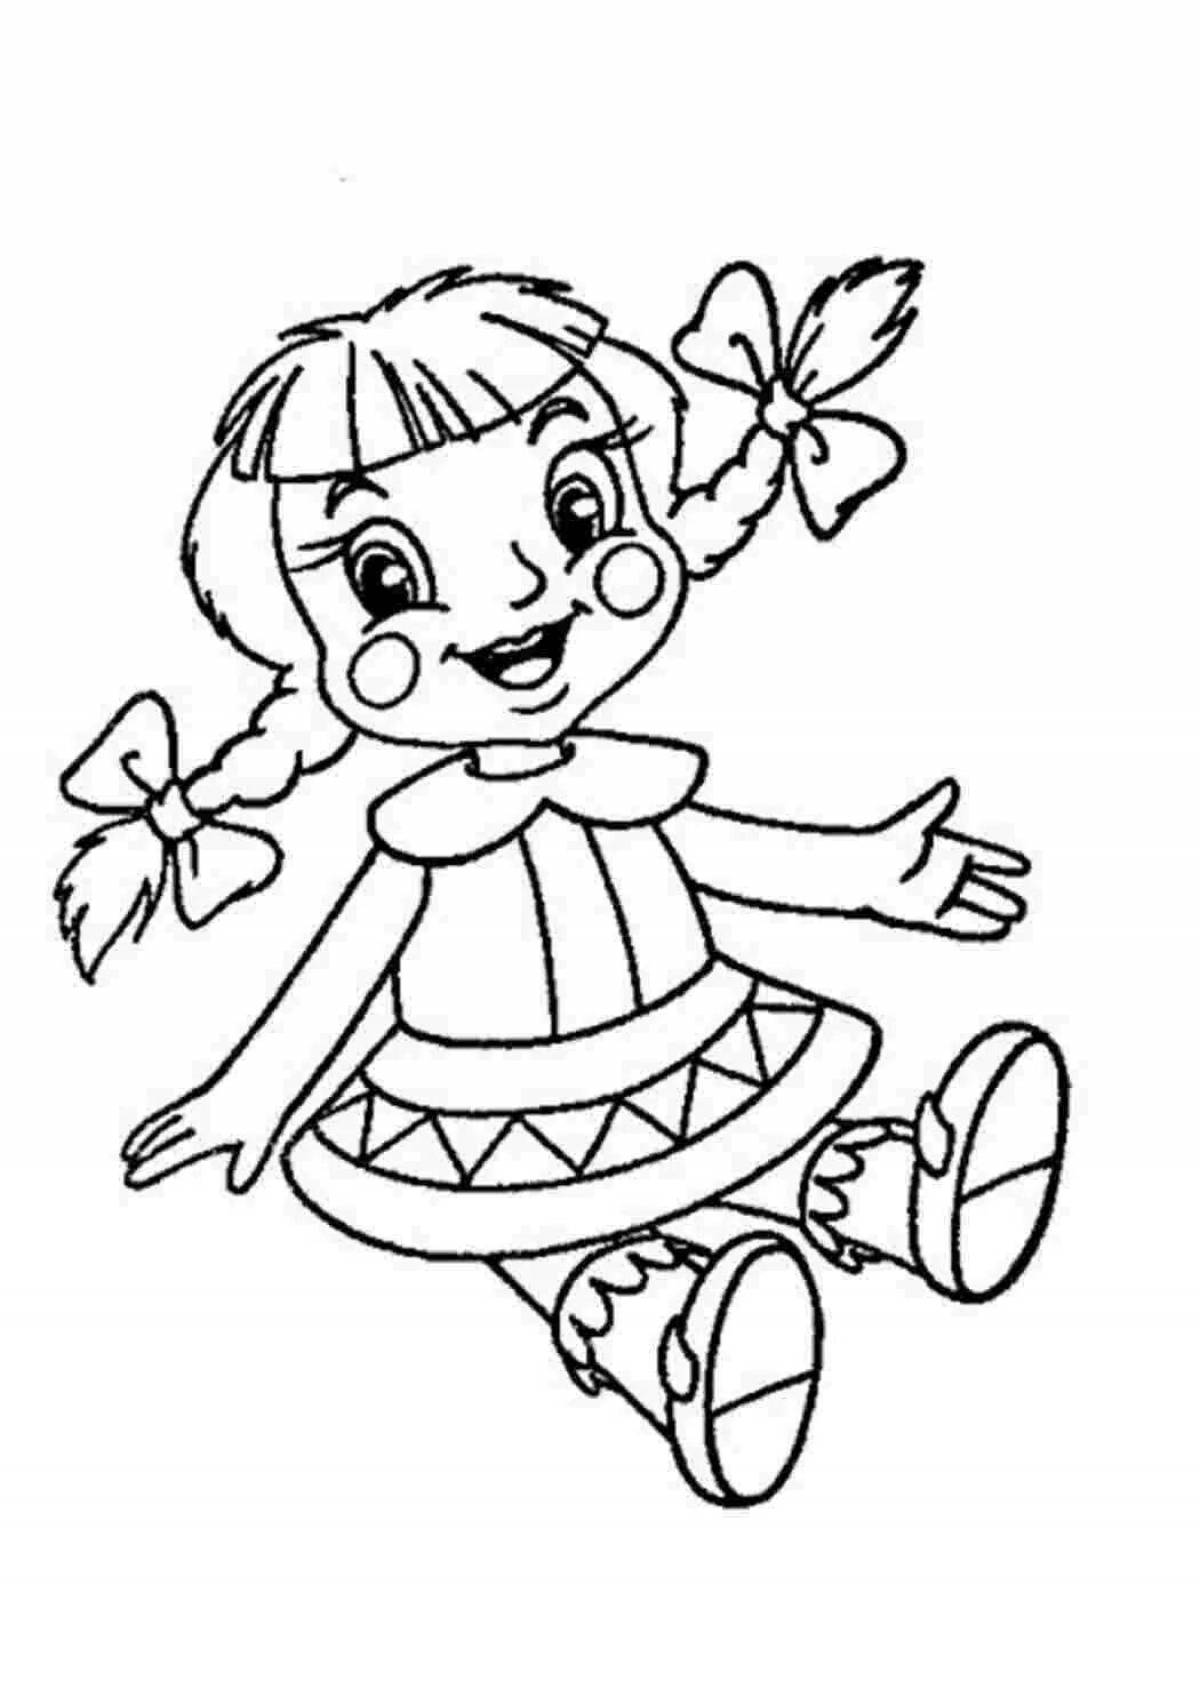 Baby doll blissful coloring